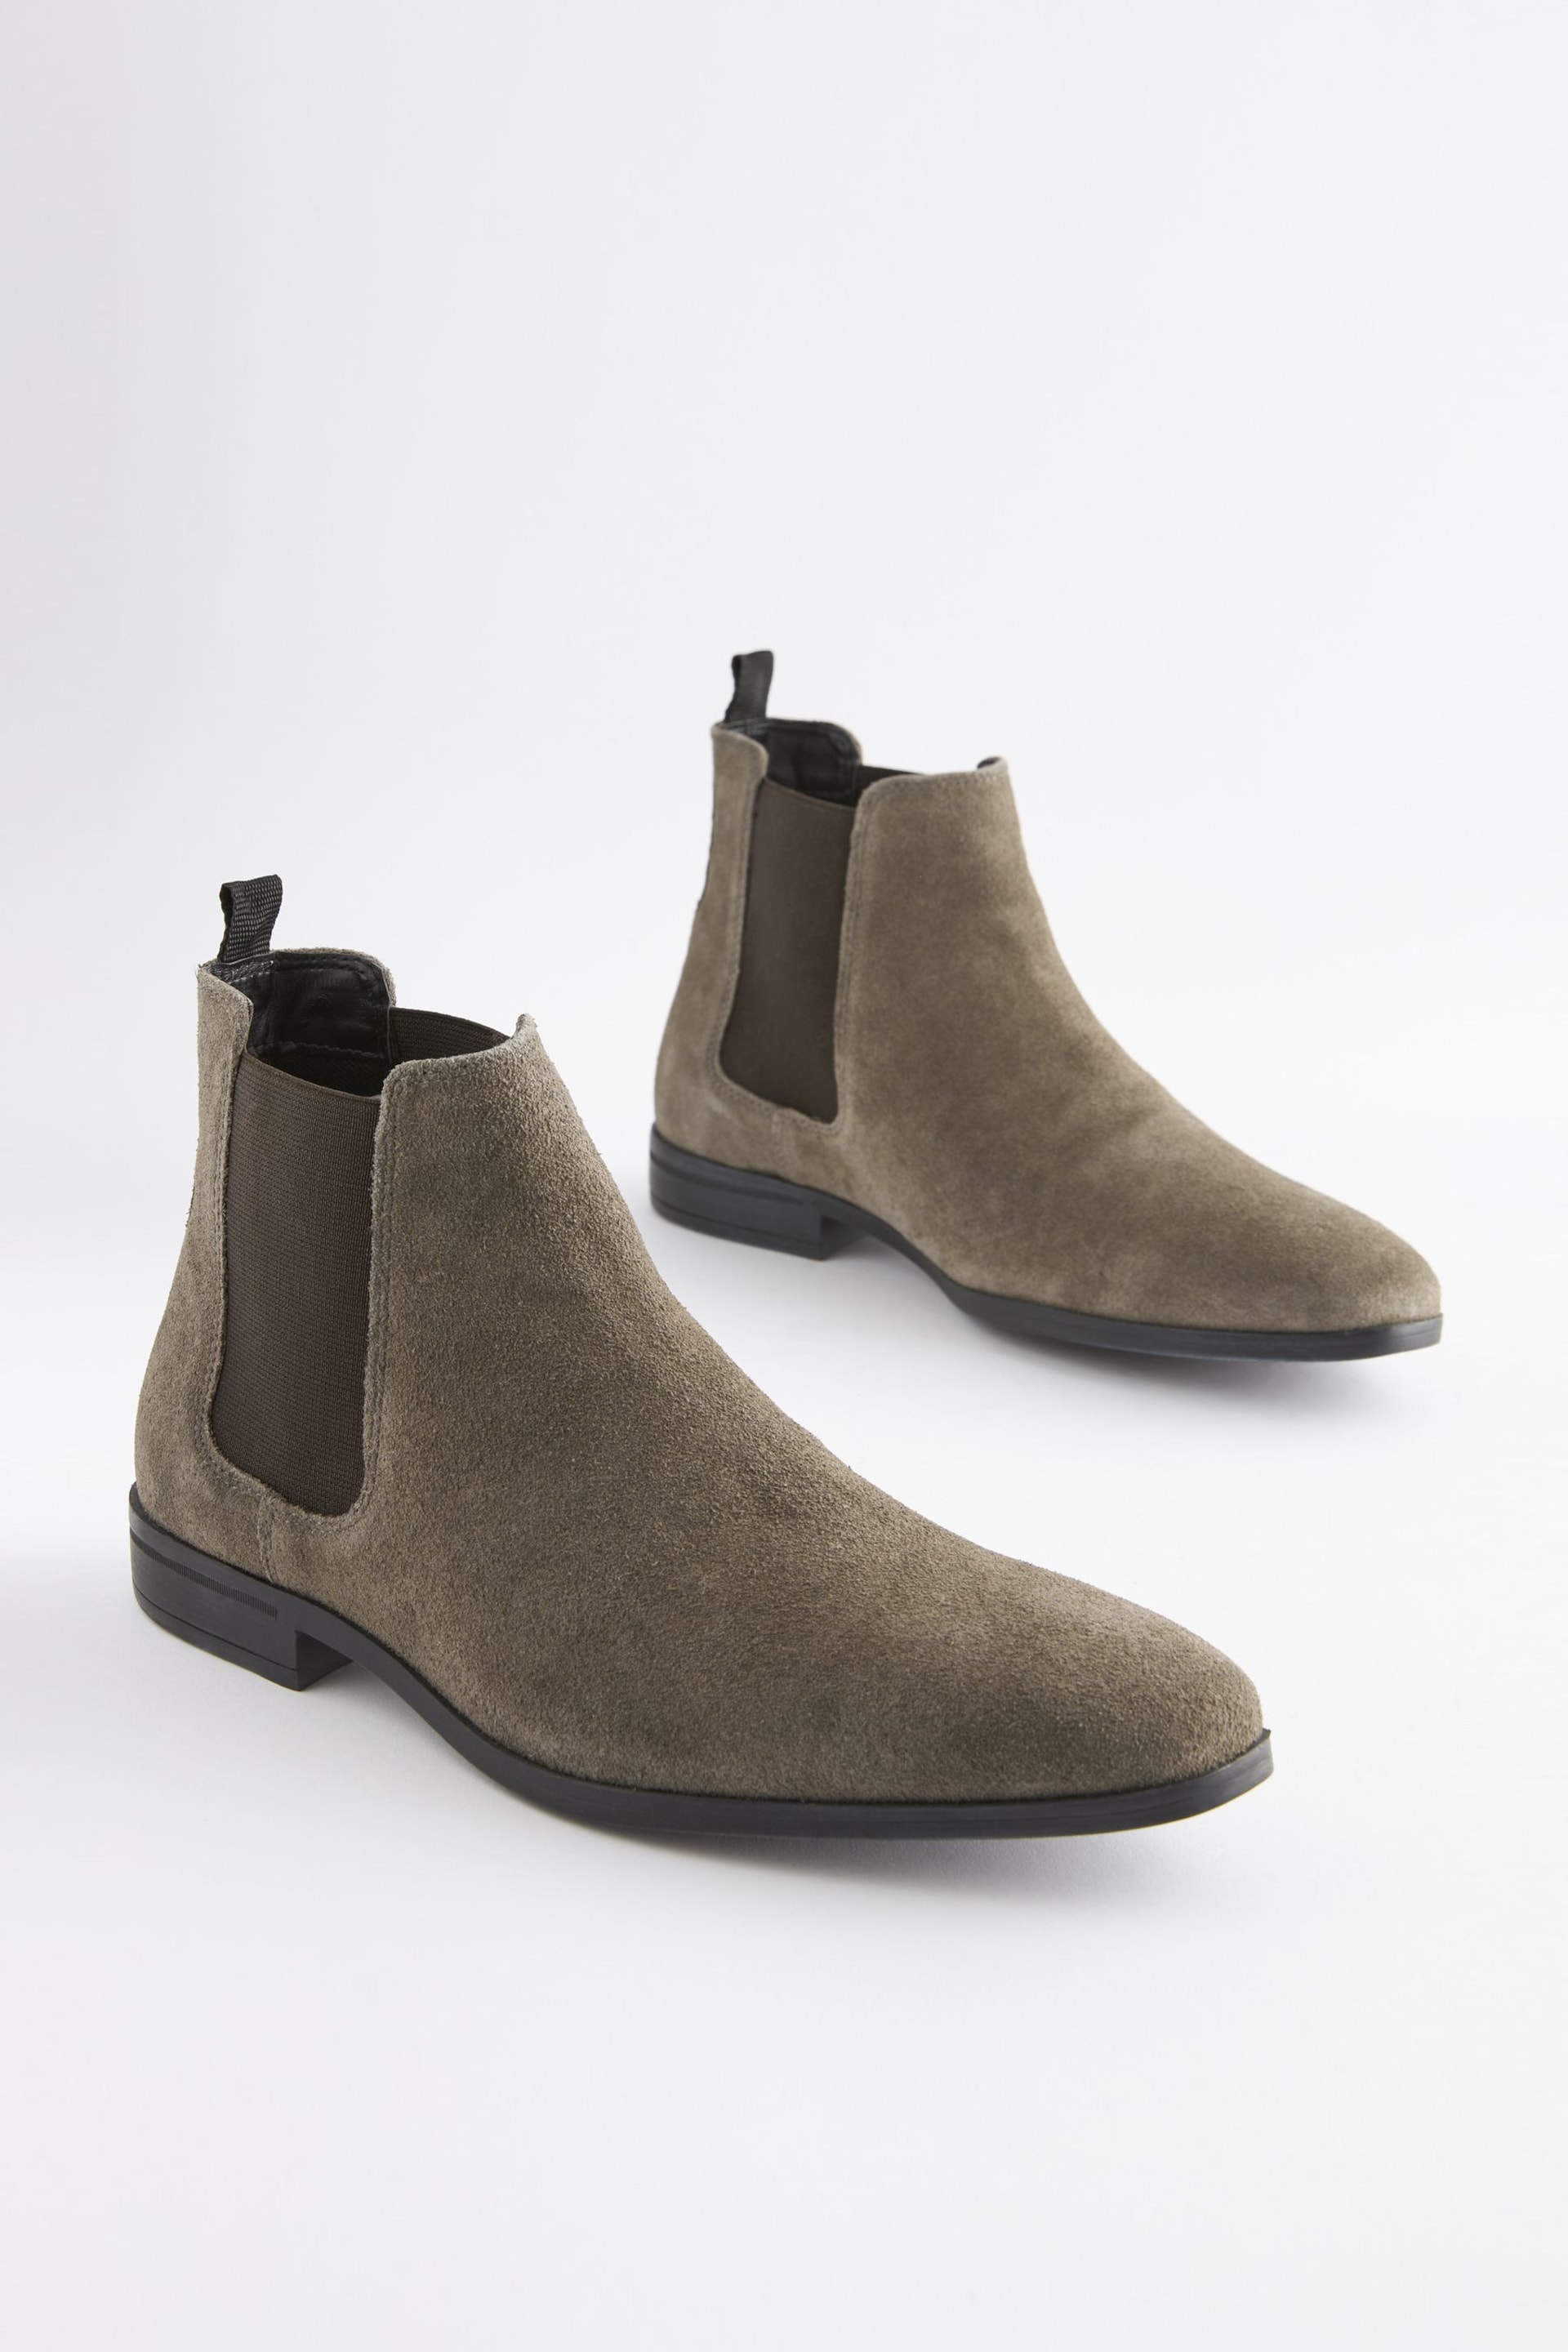 Grey Suede Chelsea Boots - Image 3 of 7